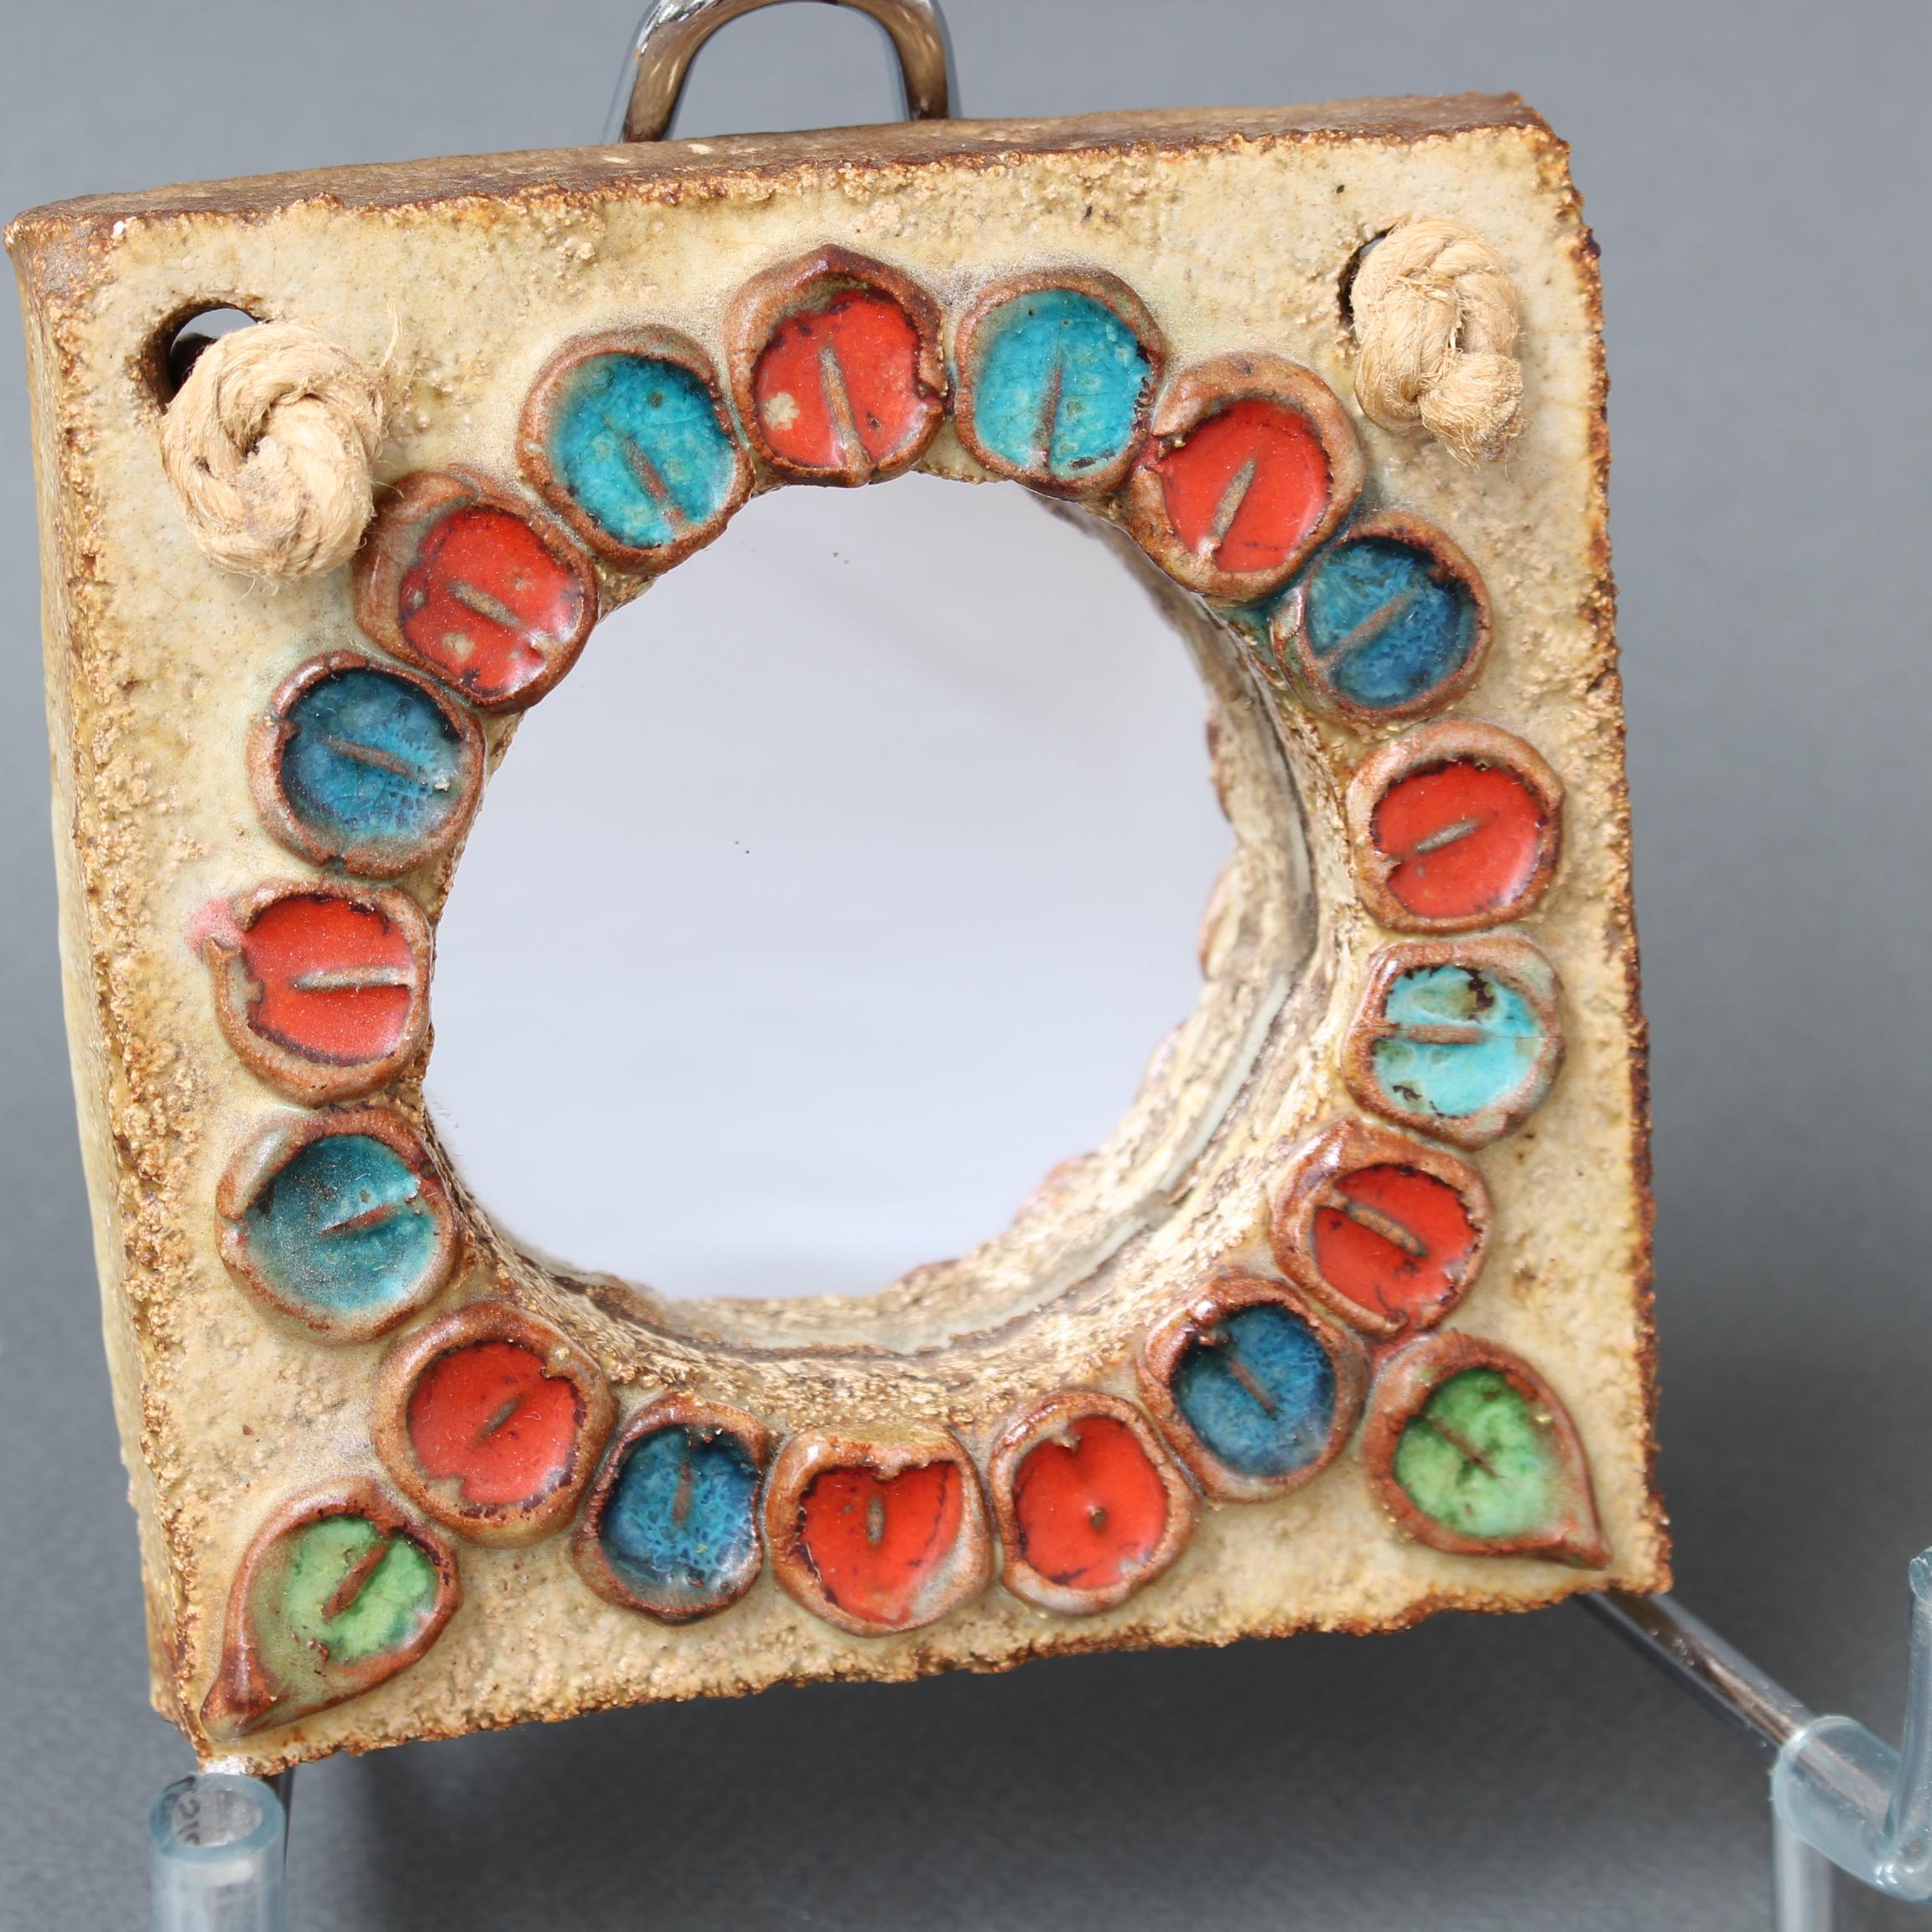 Small Vintage Ceramic Wall Mirror with Flower Motif by La Roue (circa 1960s) For Sale 5